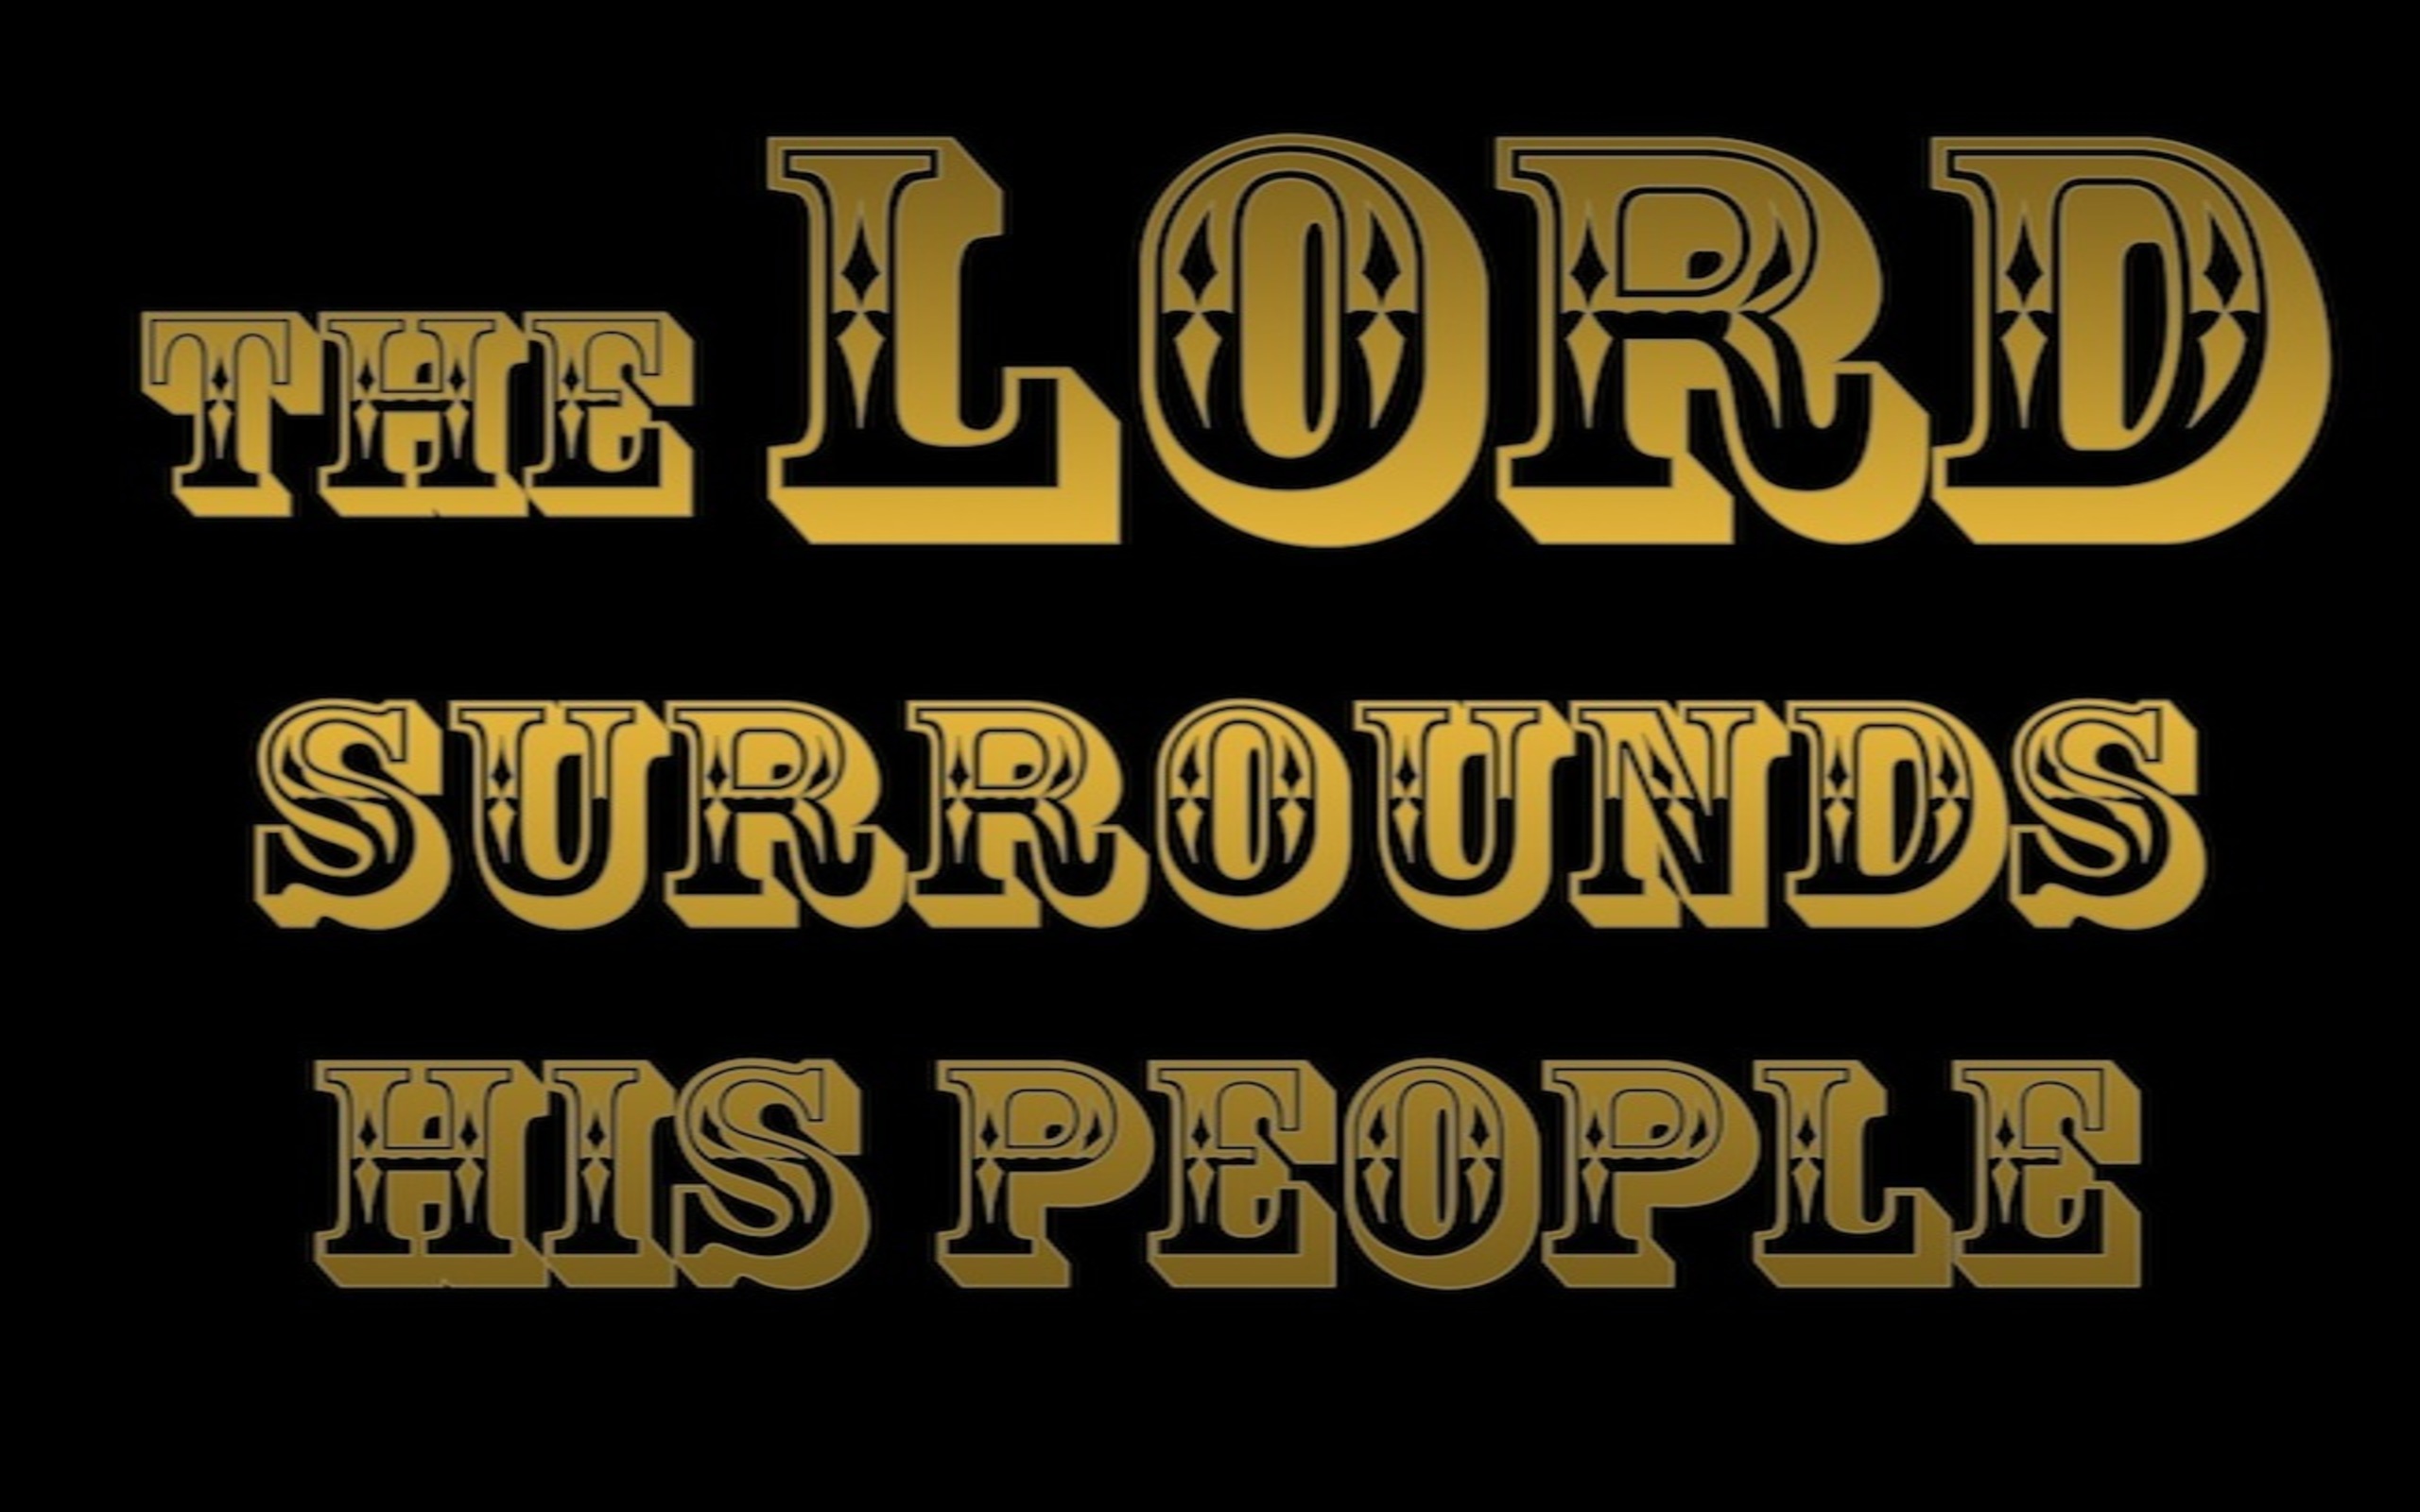 Psalm 125:2 The Lord Surrounds His People (black)